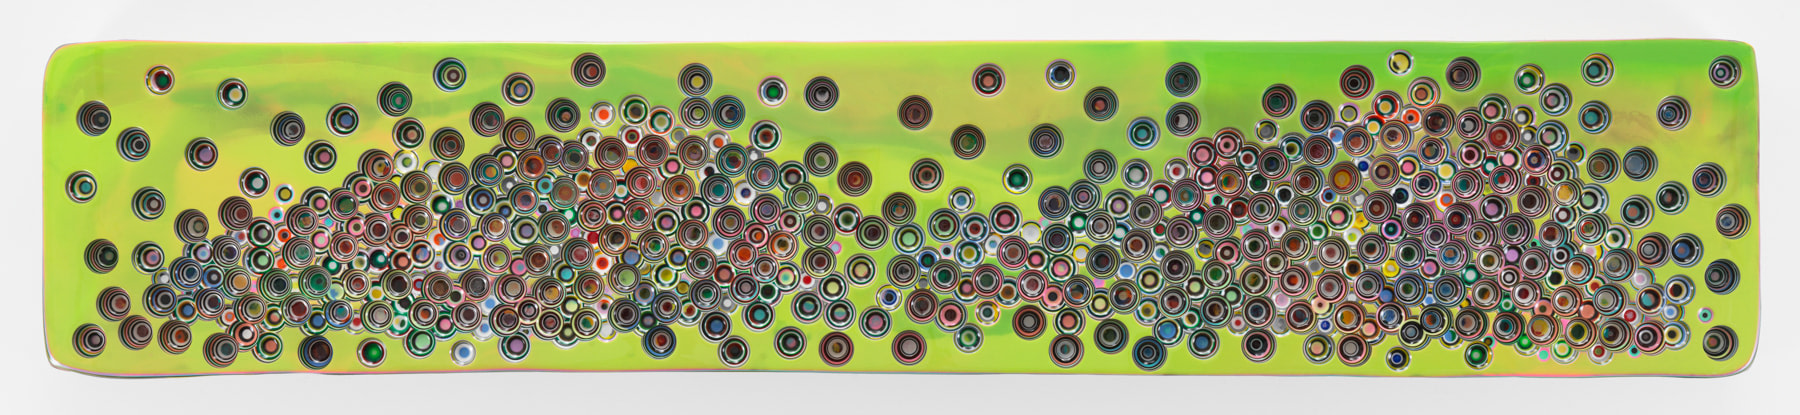 SUDDENLYFOURSNOTFIVES, 2016, Epoxy resin and pigments on wood, 18 x 96 inches, 45.7 x 243.8 cm, AMY#28365